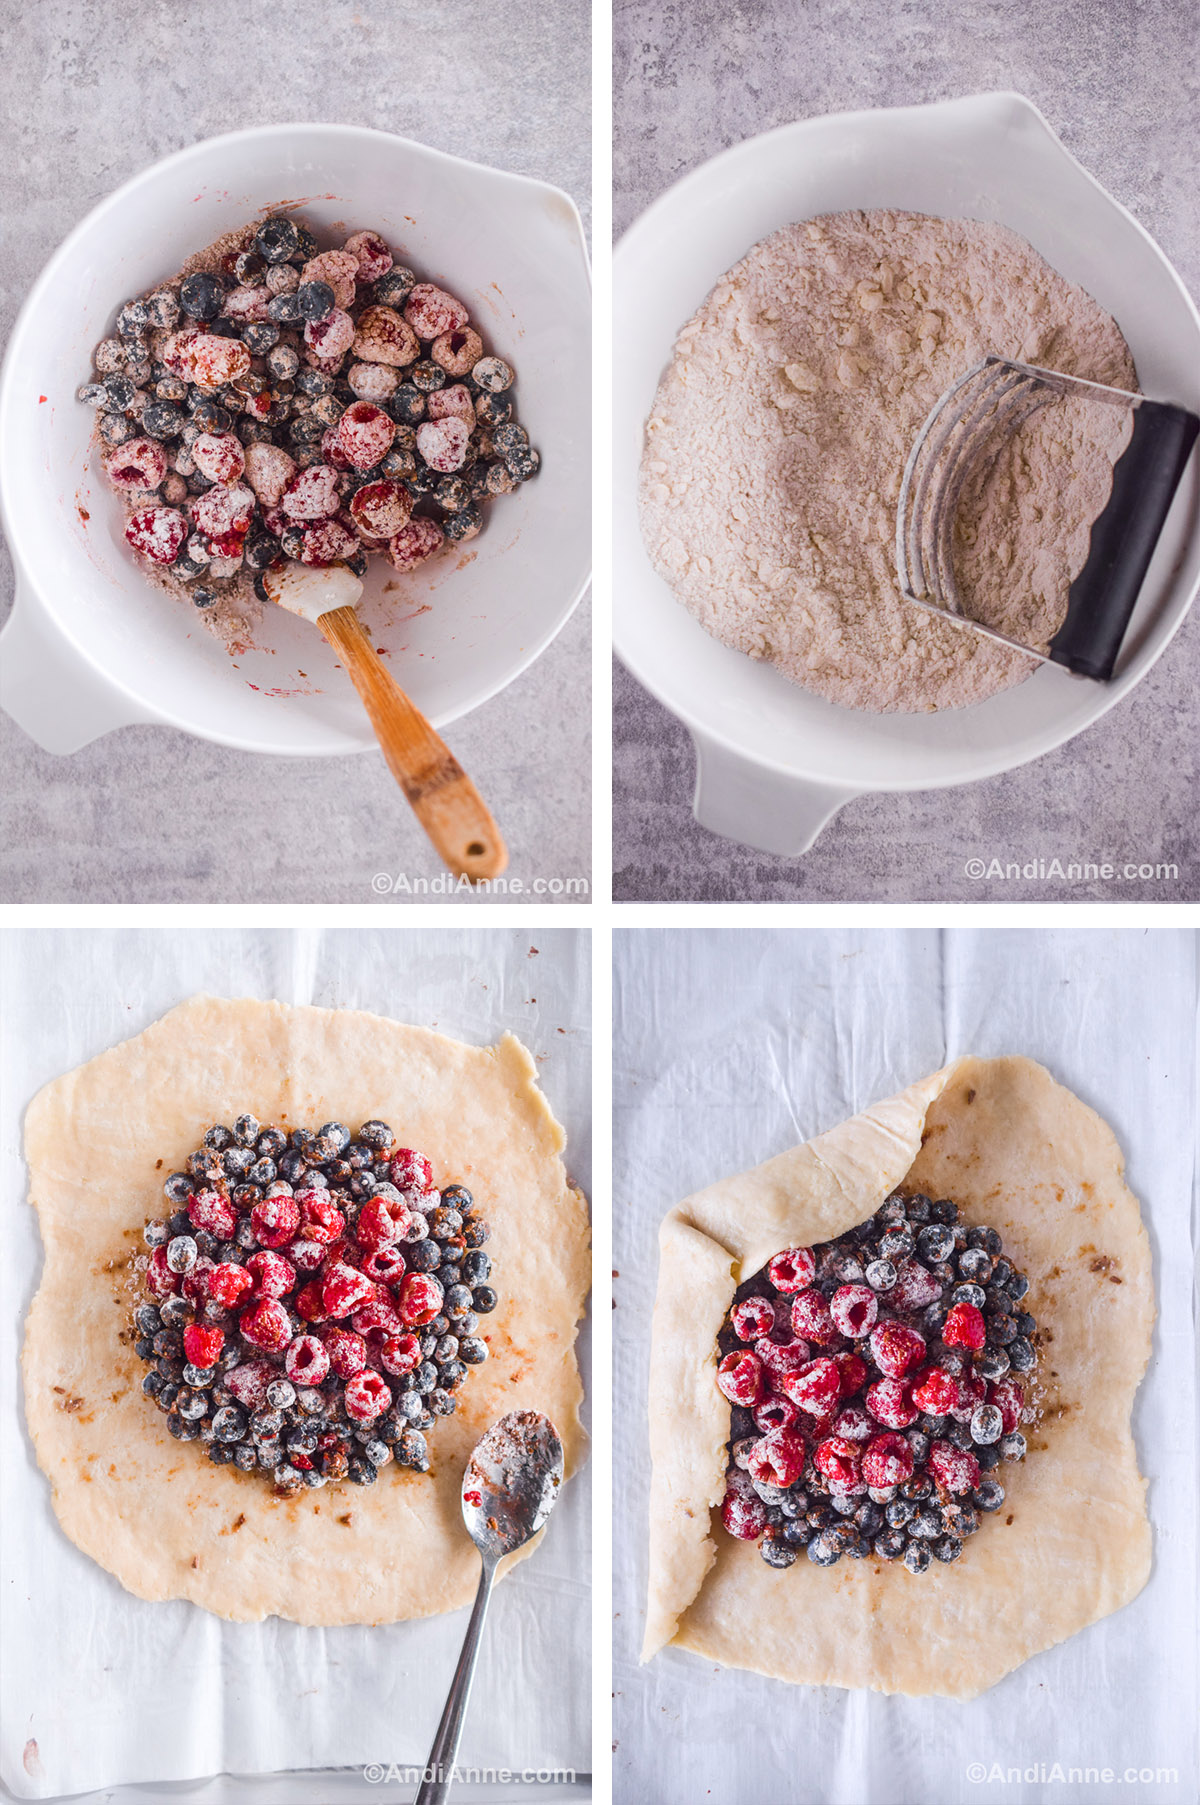 Four images showing steps to make recipe including bow of berries tossed with powdered sugar. Second image is bowl with dry flour ingredients and a pastry cutter. Third is pie crust rolled out with stacked berries in the center. Fourth is half of the dough folded over with berries in the center.